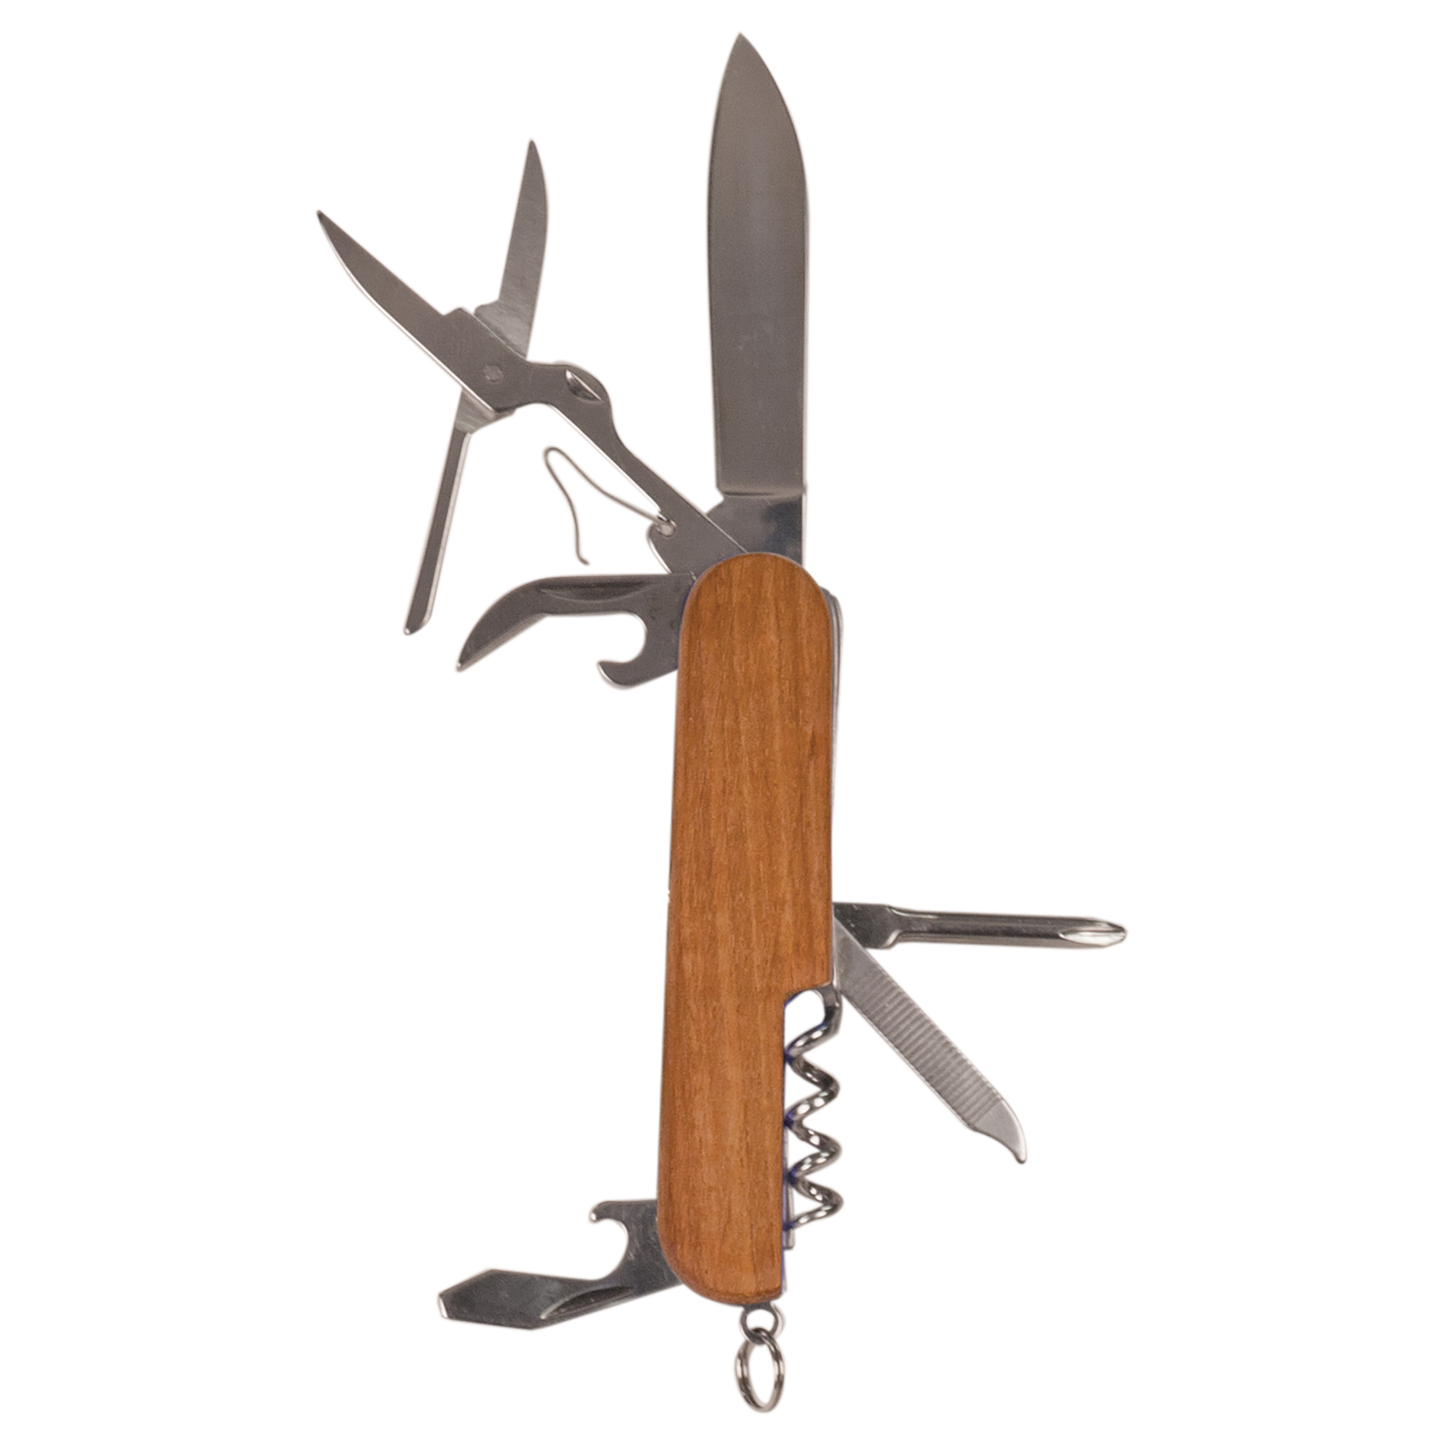 Personalized 3 1/2" Wooden 8-Function Multi-Tool Pocket Knife.